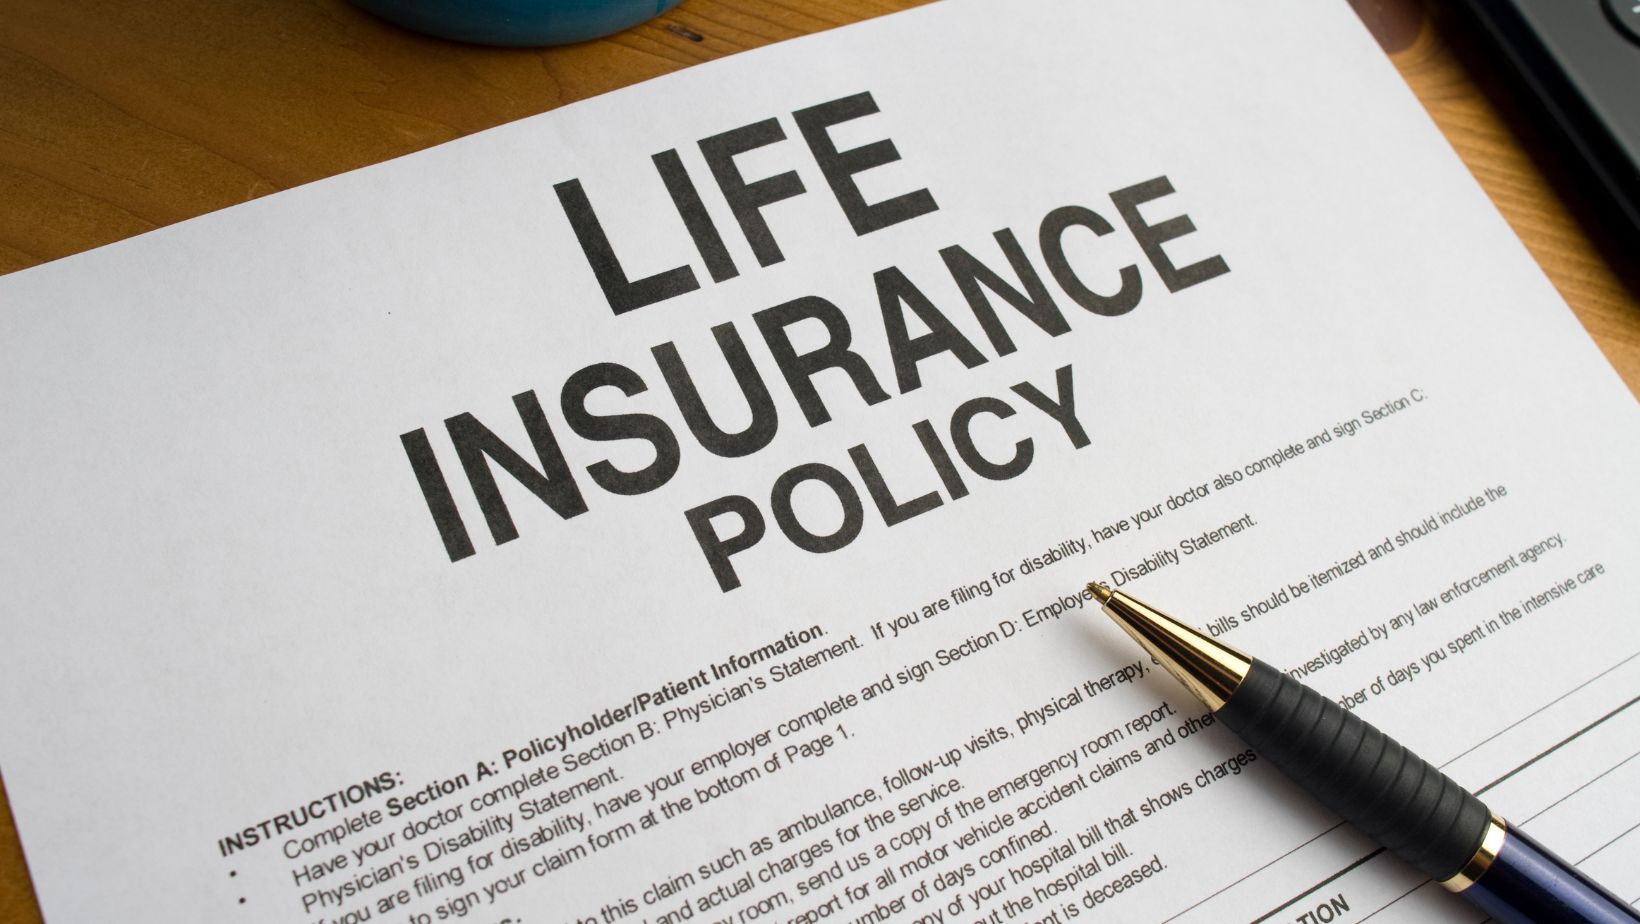 Insurance Tailoring: Additional Coverage Can be Added to a Whole Life Policy by Adding a